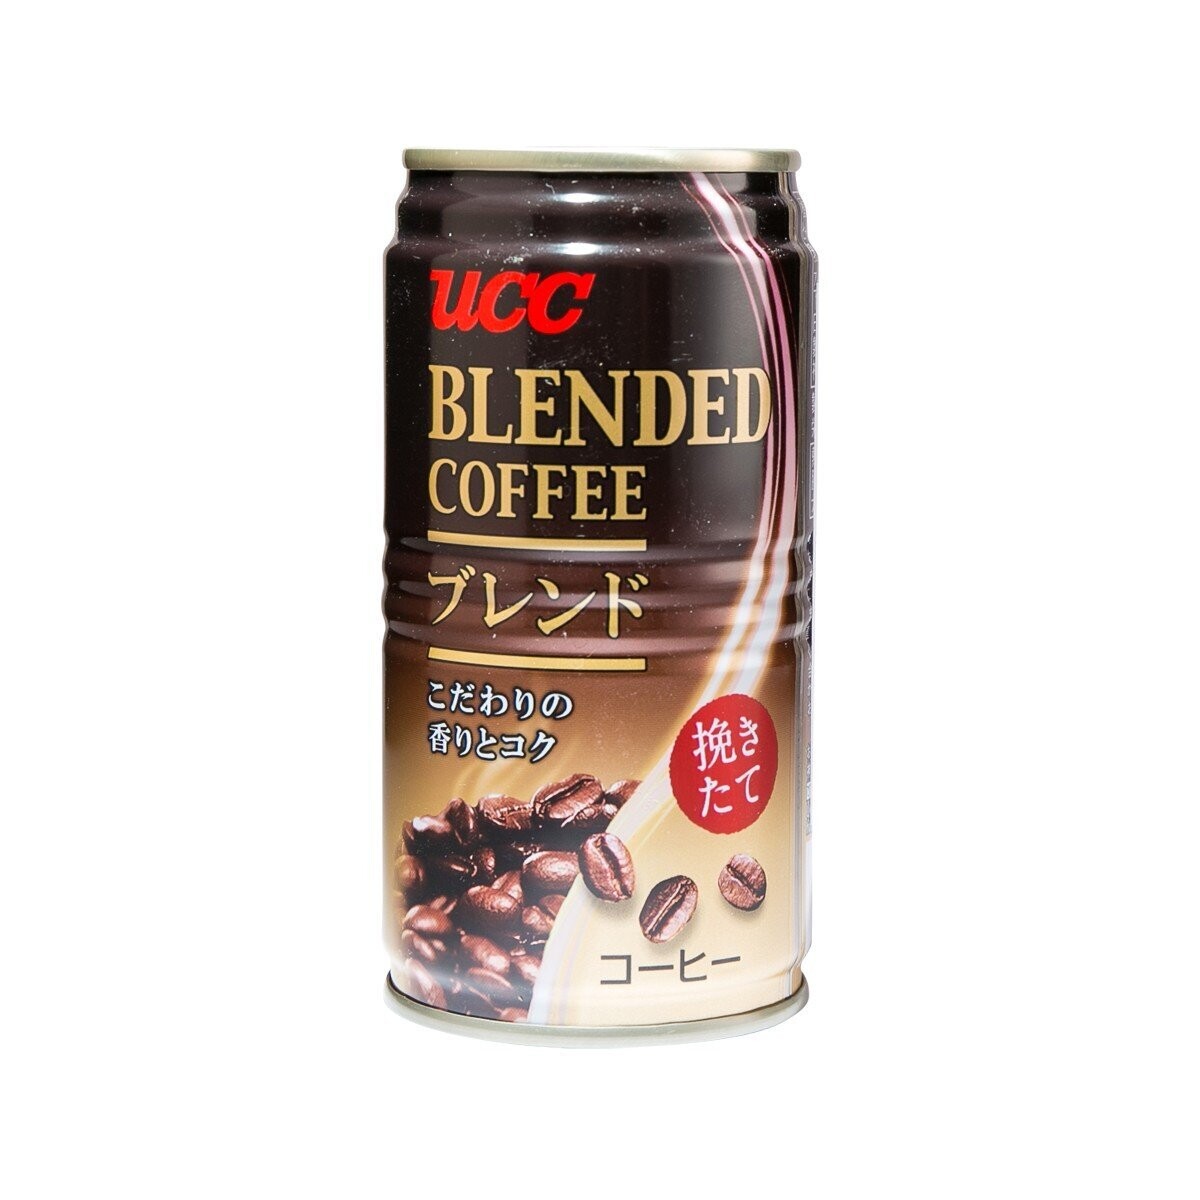 UCC Blended Coffee (181ML)